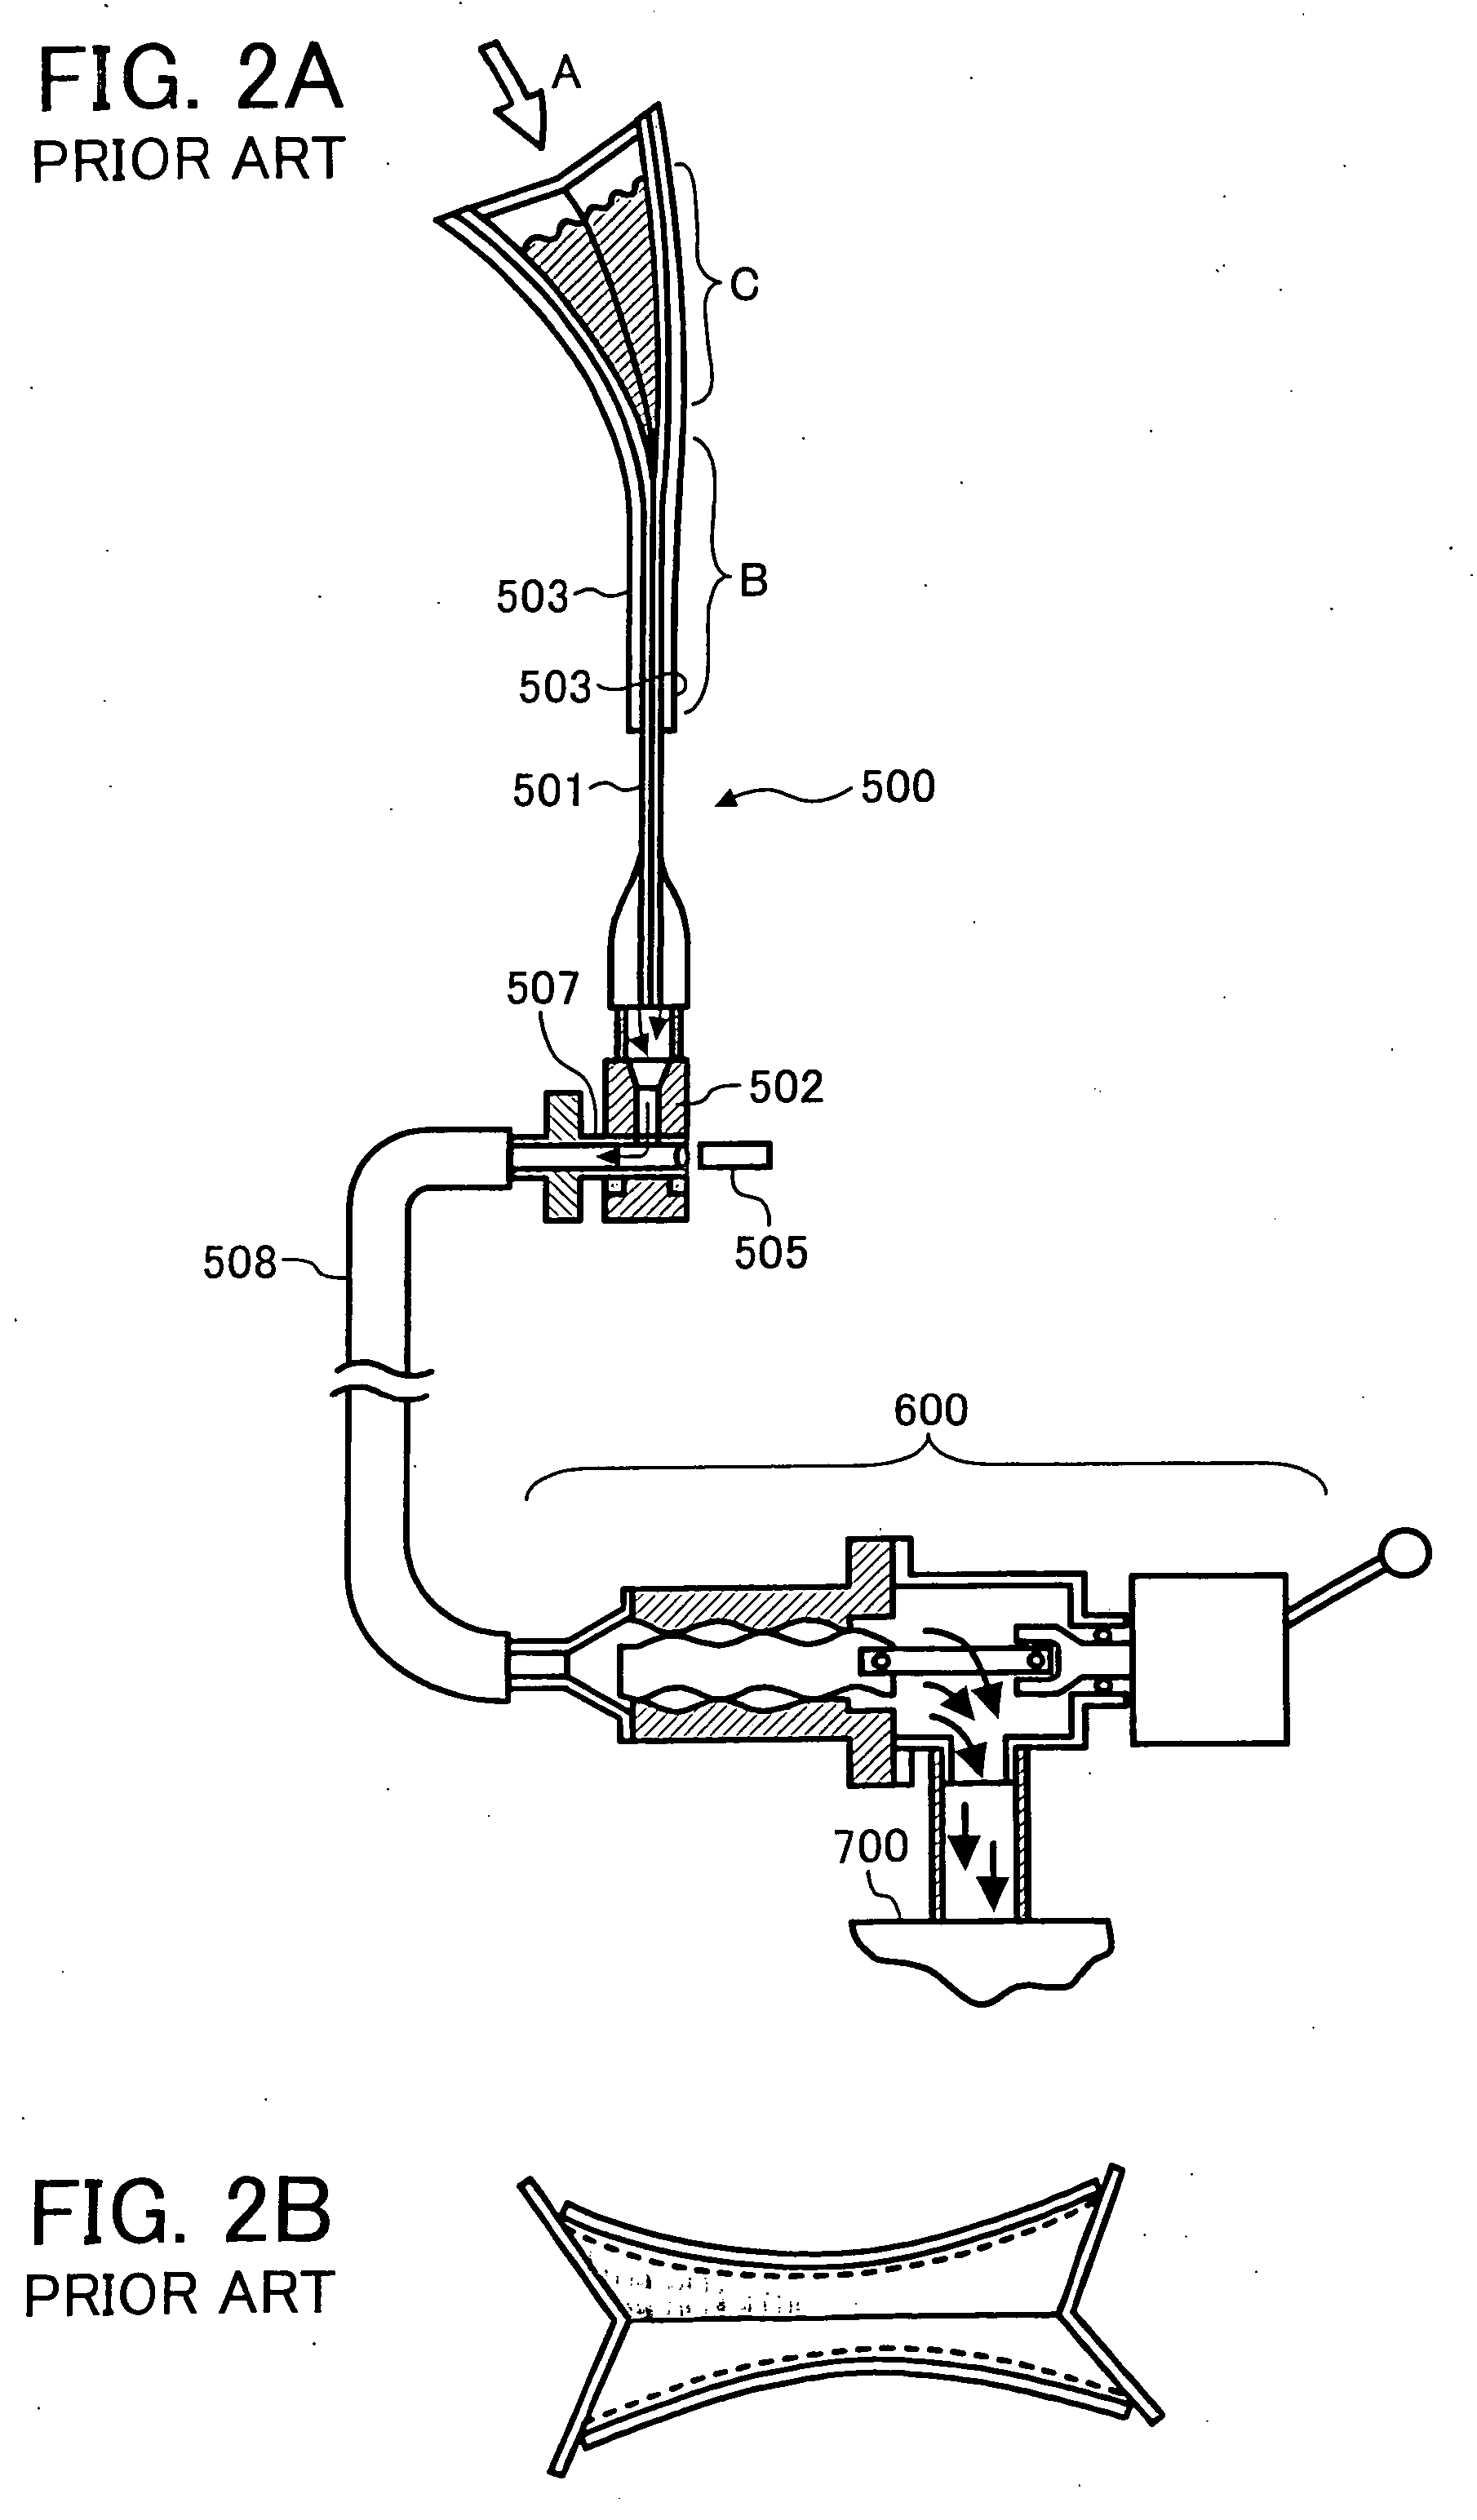 Apparatuses for image forming capable of effectively conveying developer therefrom and a method of effectively forming a reinforcing member adhering to the apparatuses